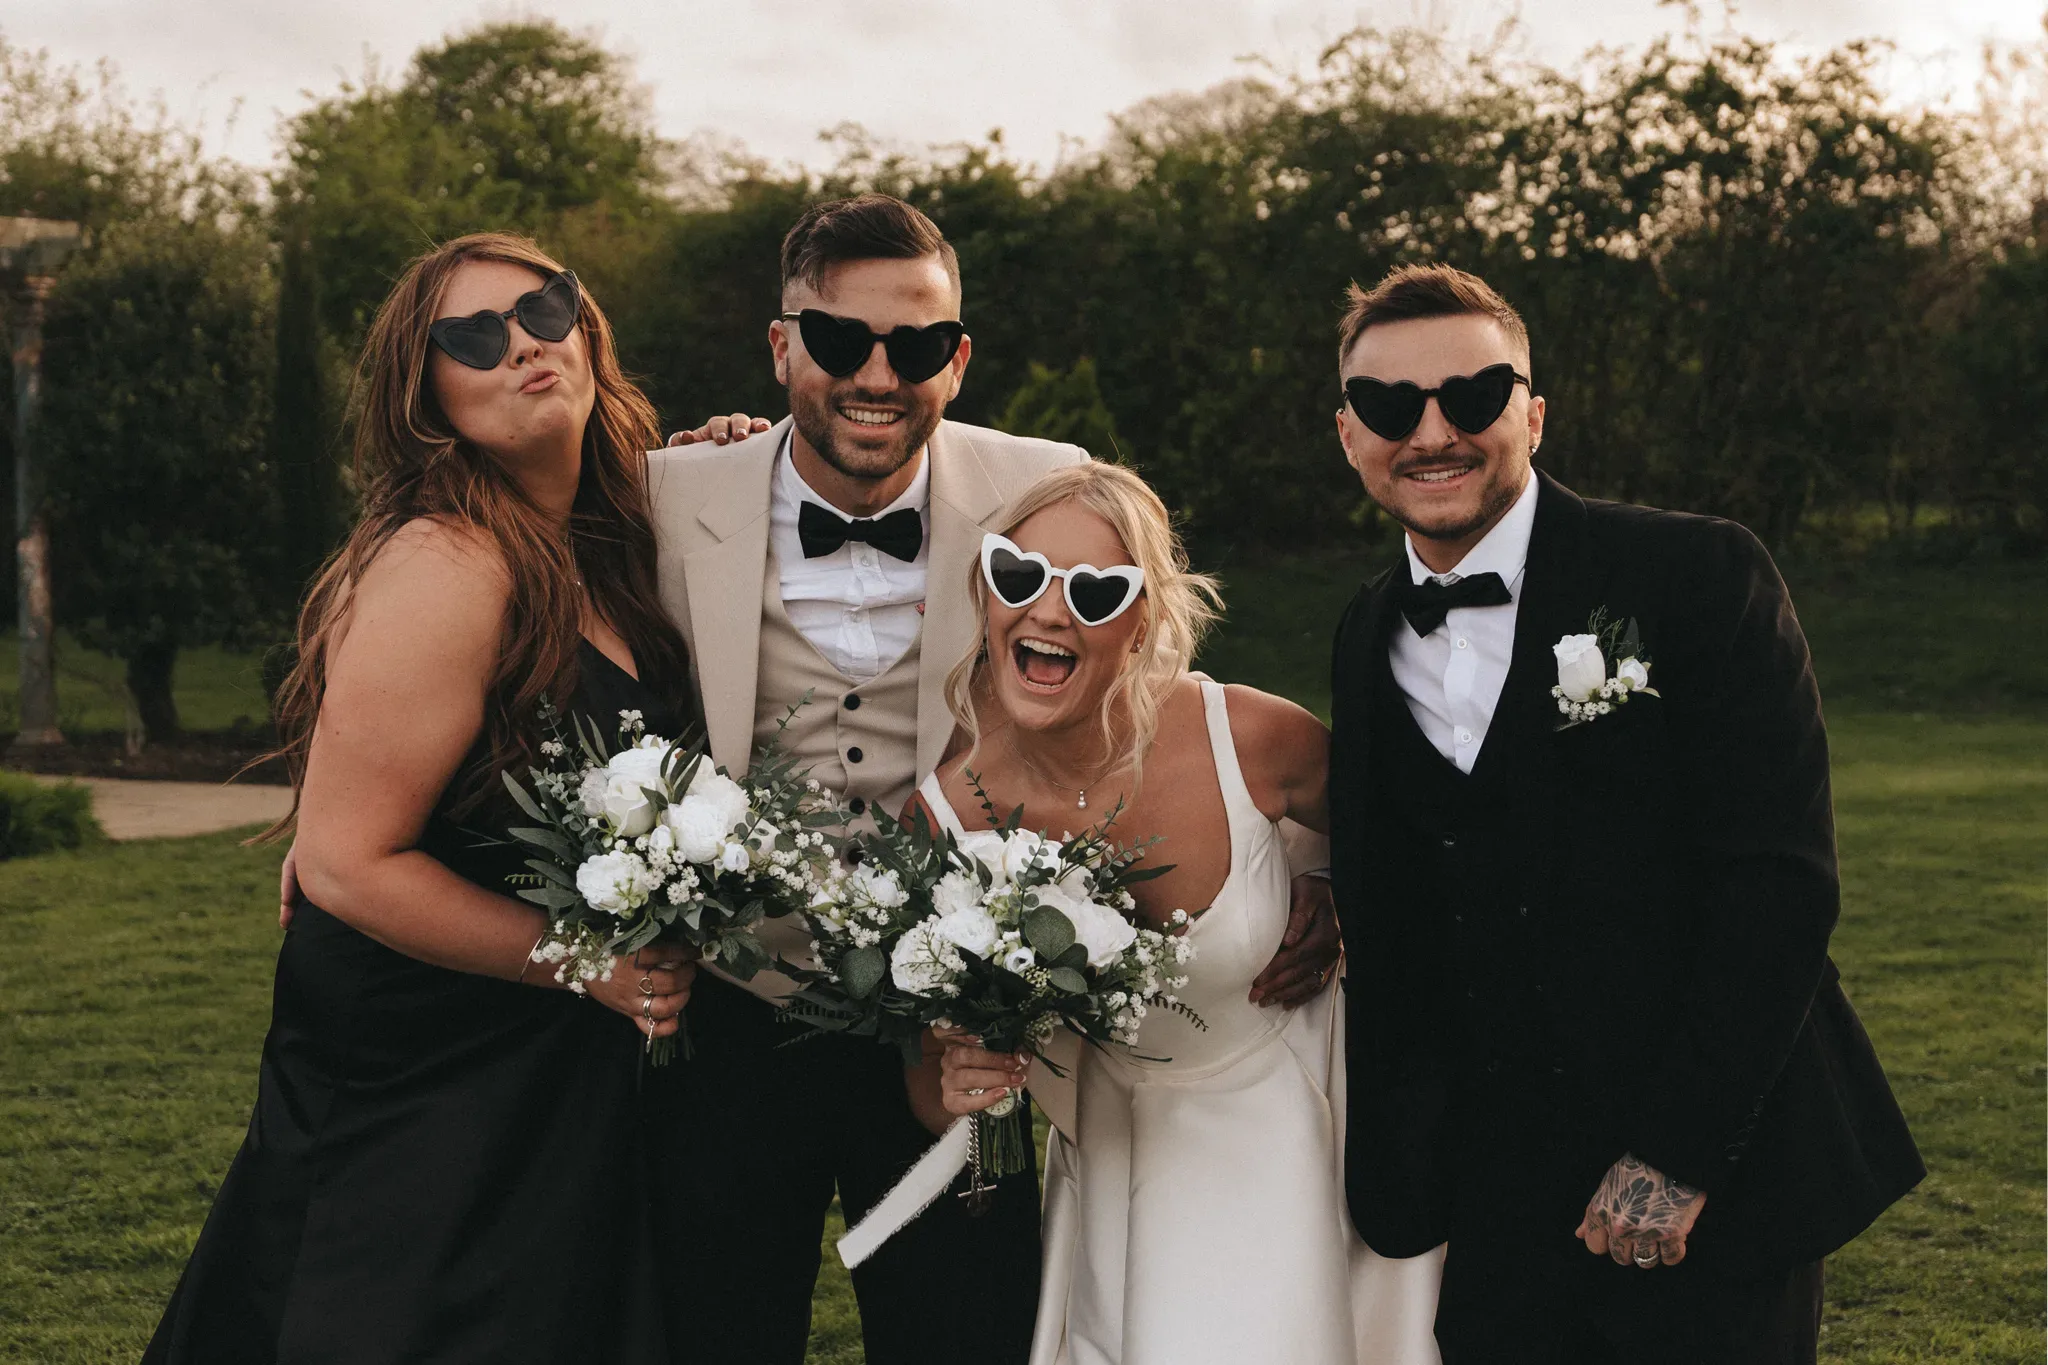 Two couples in formal wedding attire pose joyfully outdoors, each wearing playful sunglasses. the men wear black tuxedos and the woman in a white dress holds a bouquet, with greenery in the background.